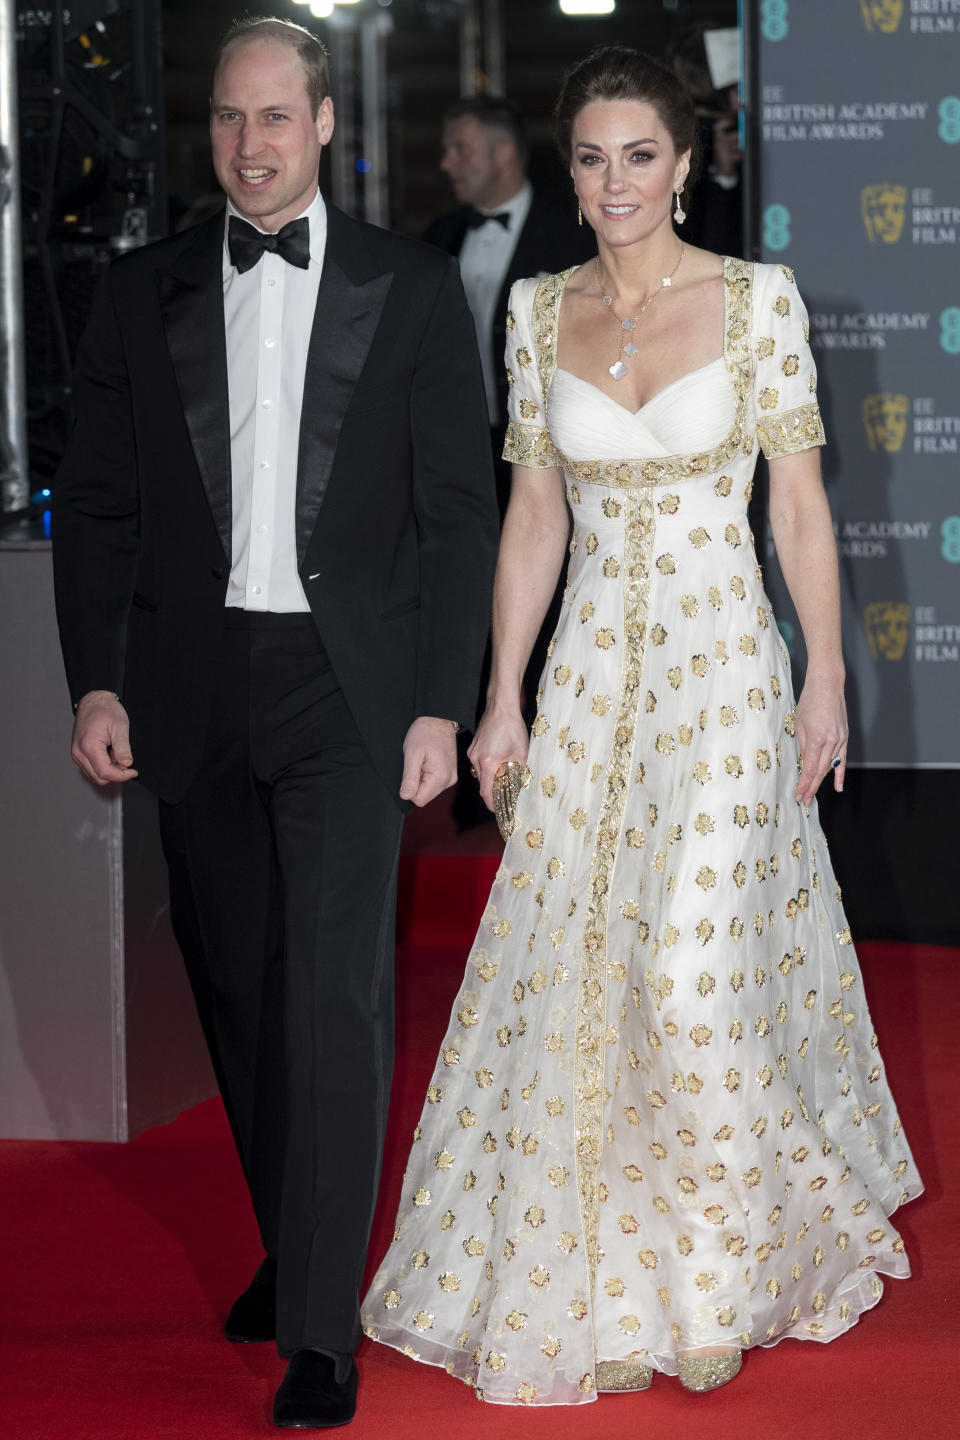 The Duke and Duchess of Cambridge at the BAFTAs in London on Feb. 2.